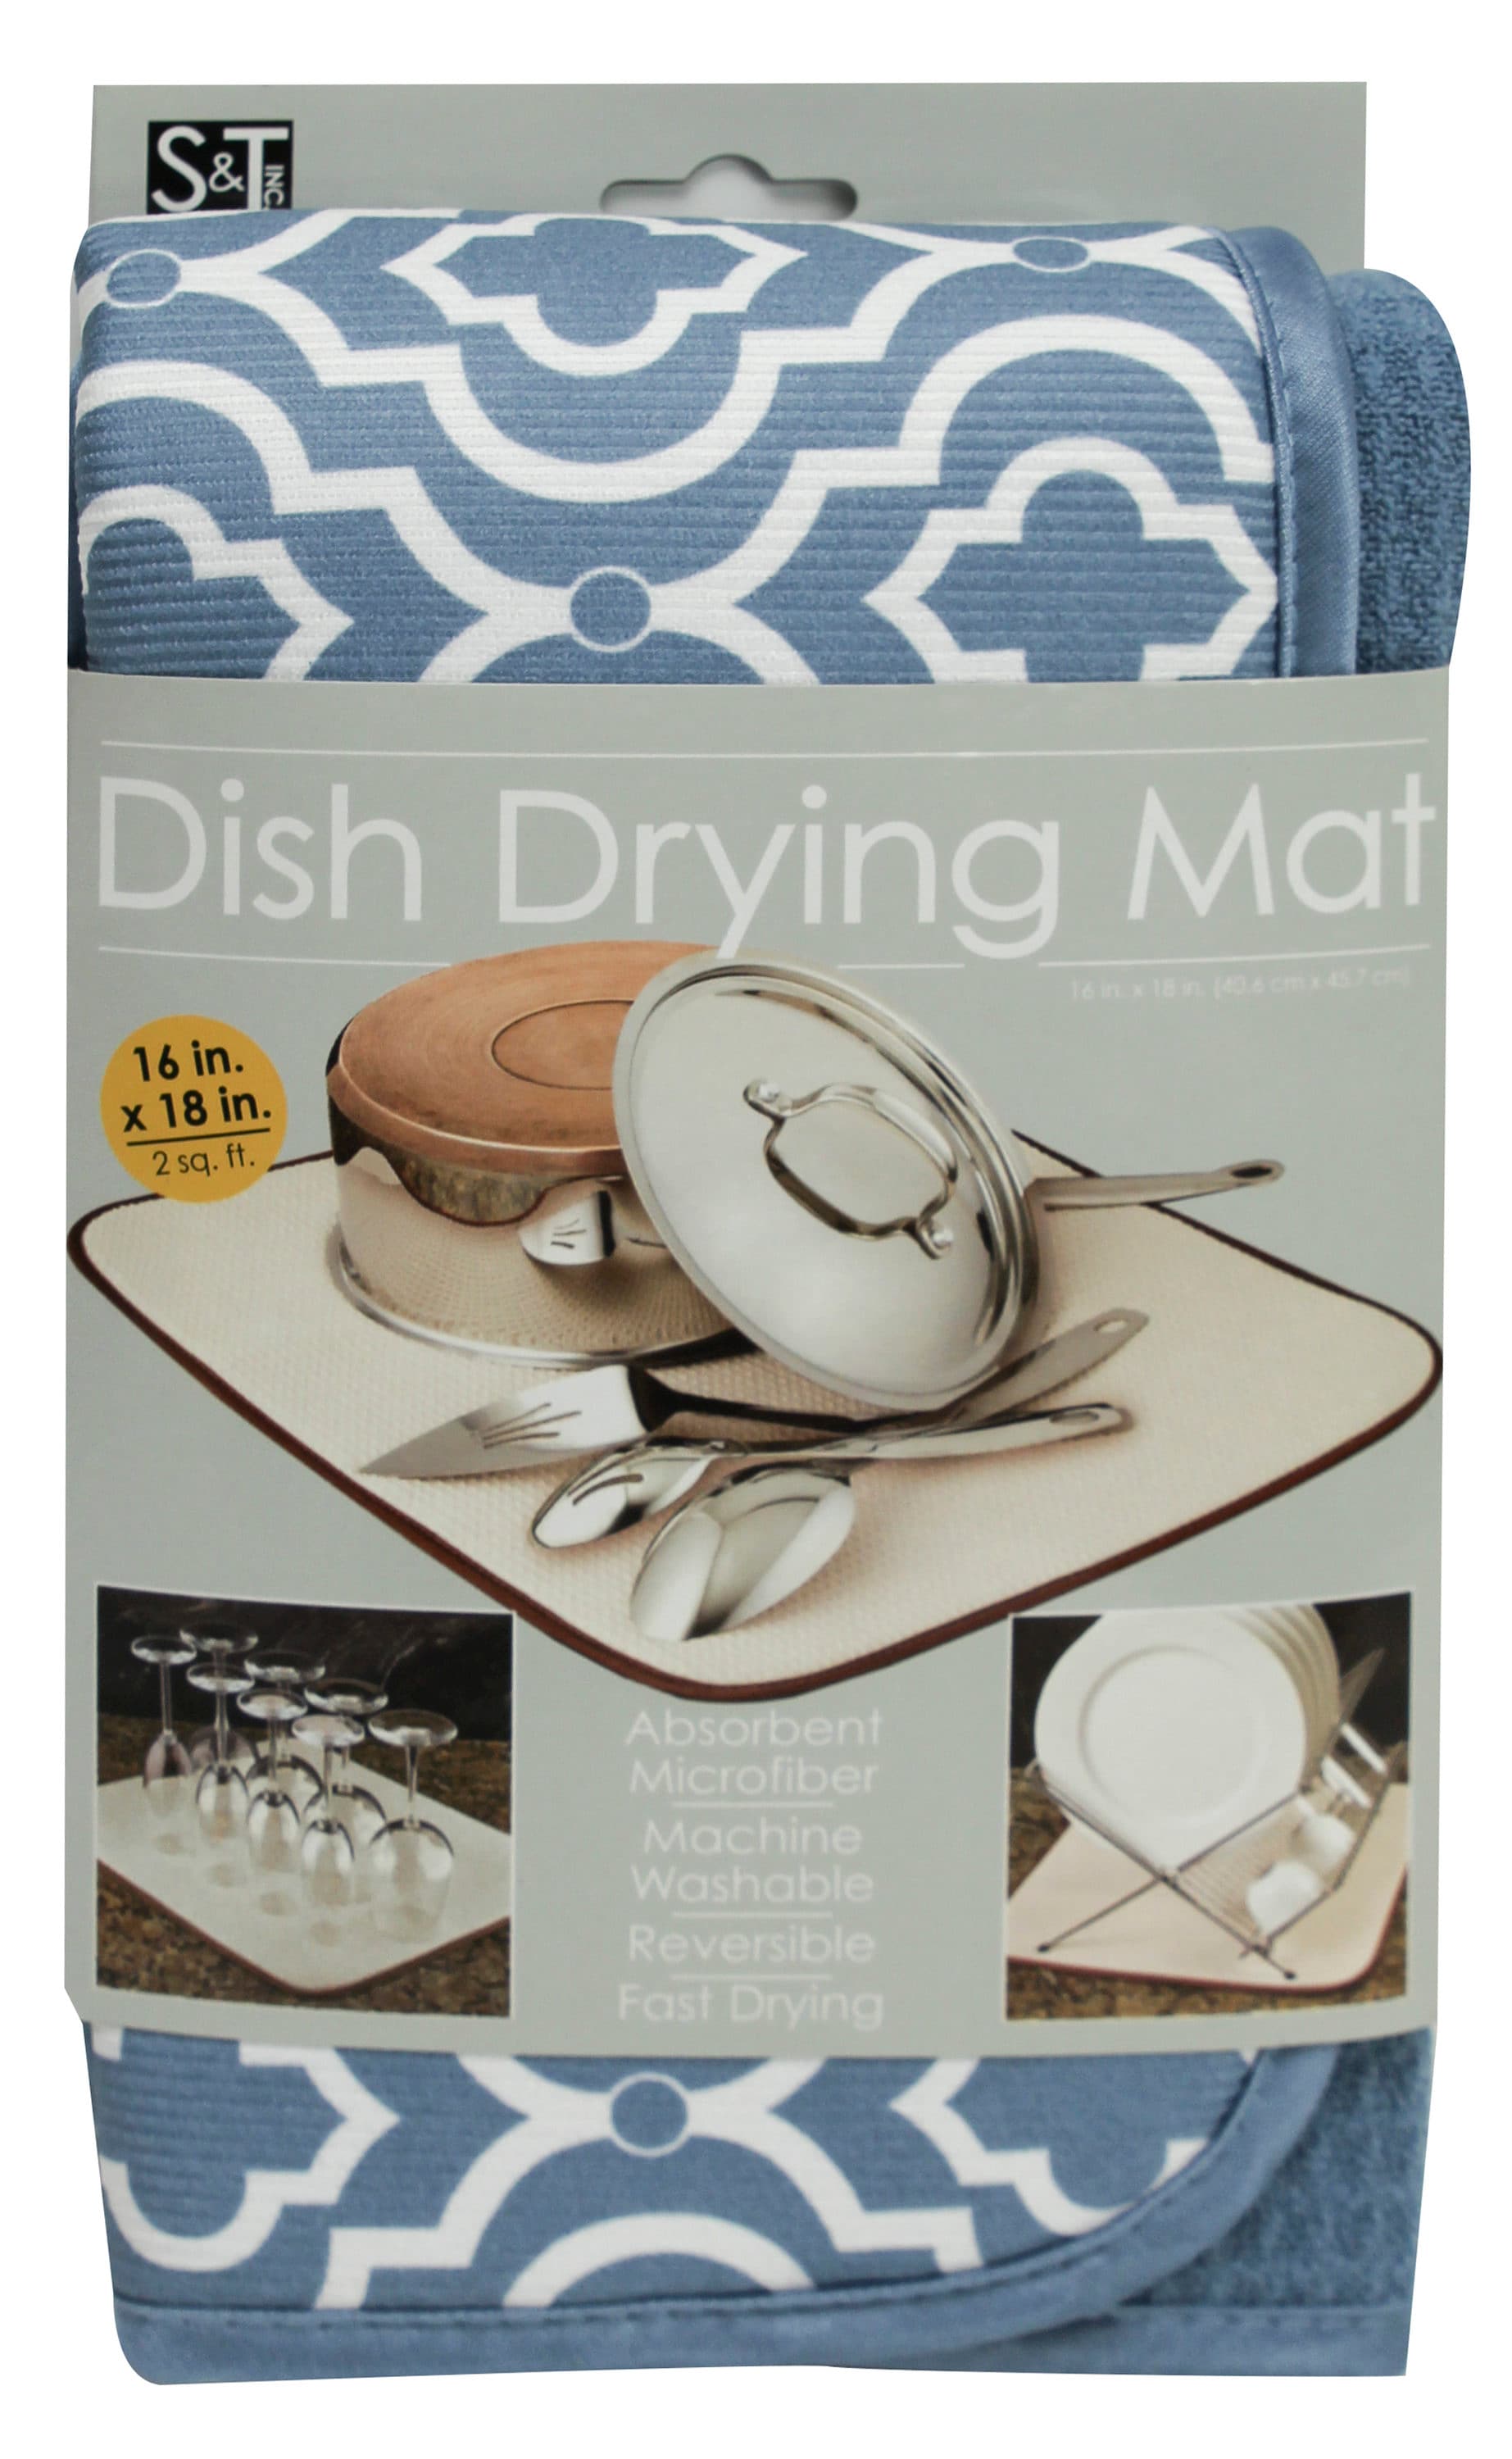 S&T INC. Dish Drying Mat for Kitchen, Absorbent, Reversible